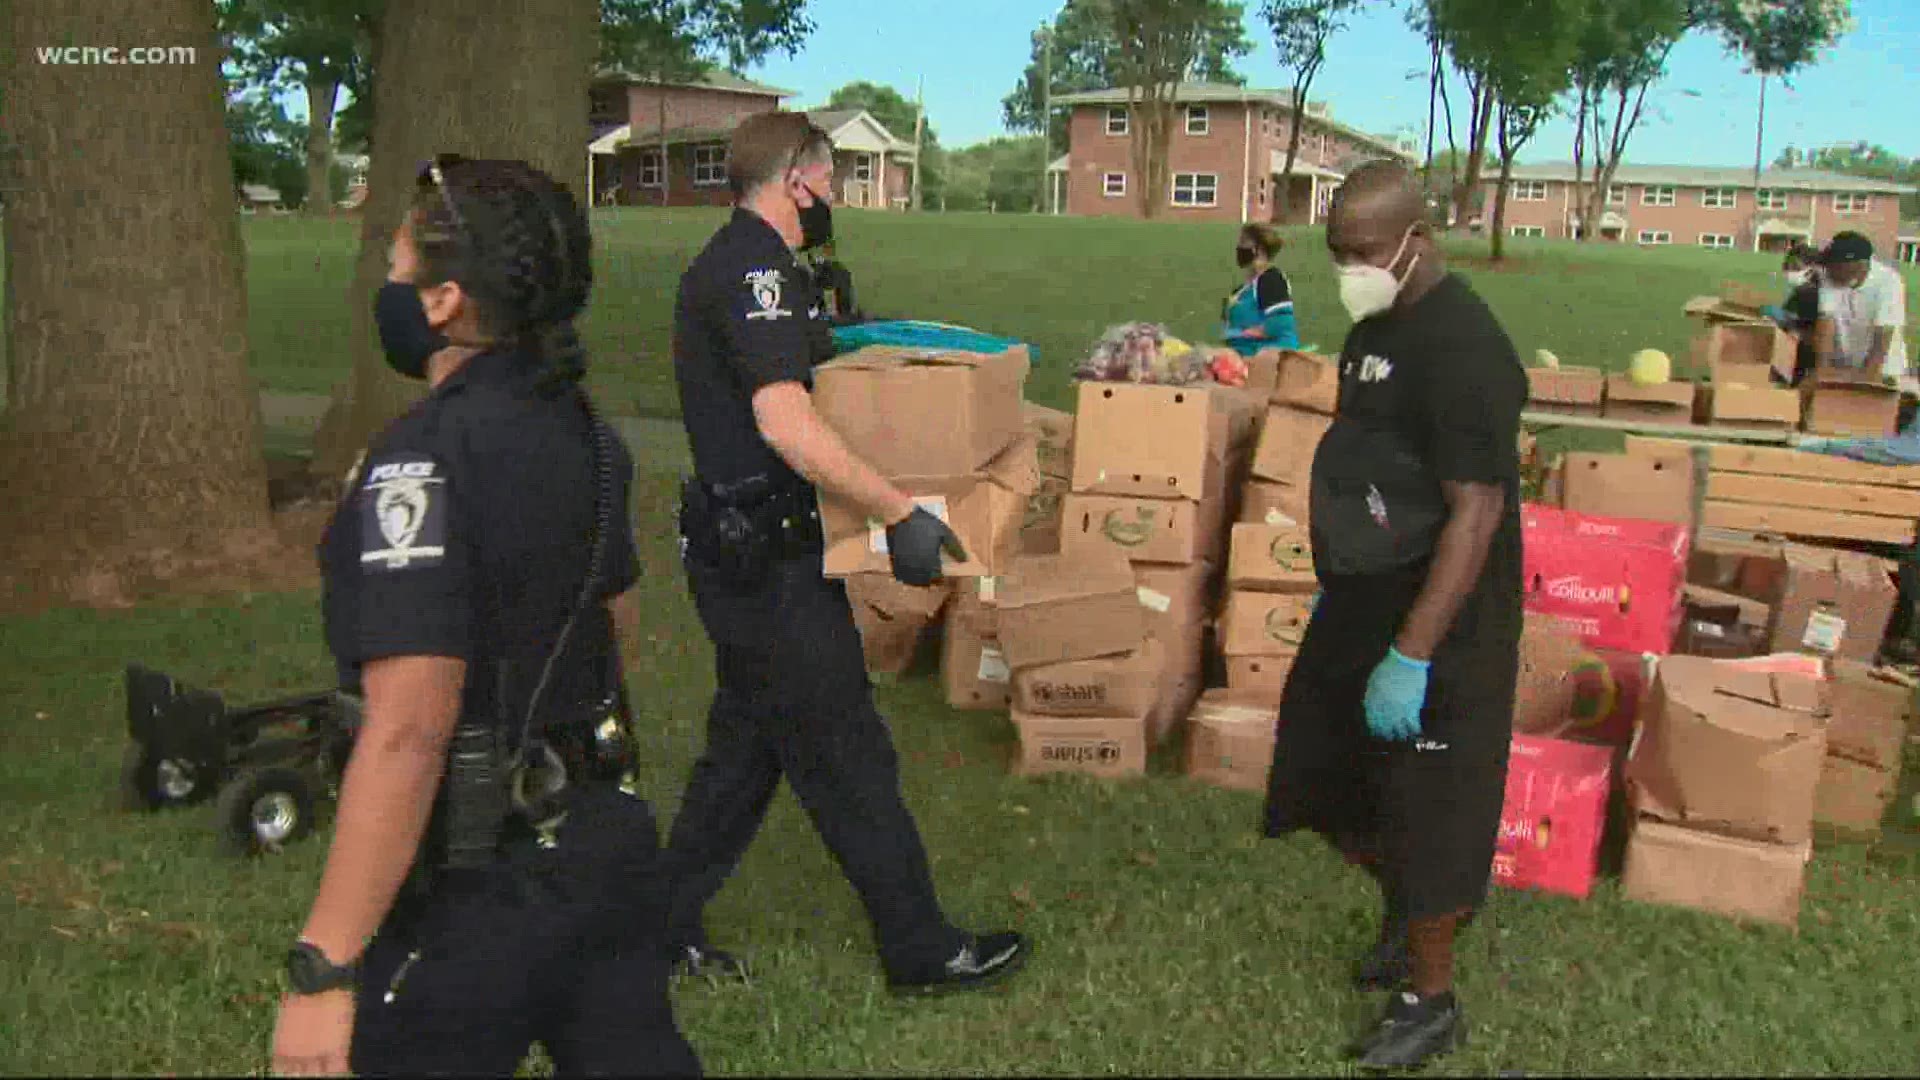 Hamilton and his foundation helped clean up a Charlotte neighborhood then give away free food and masks to the community.